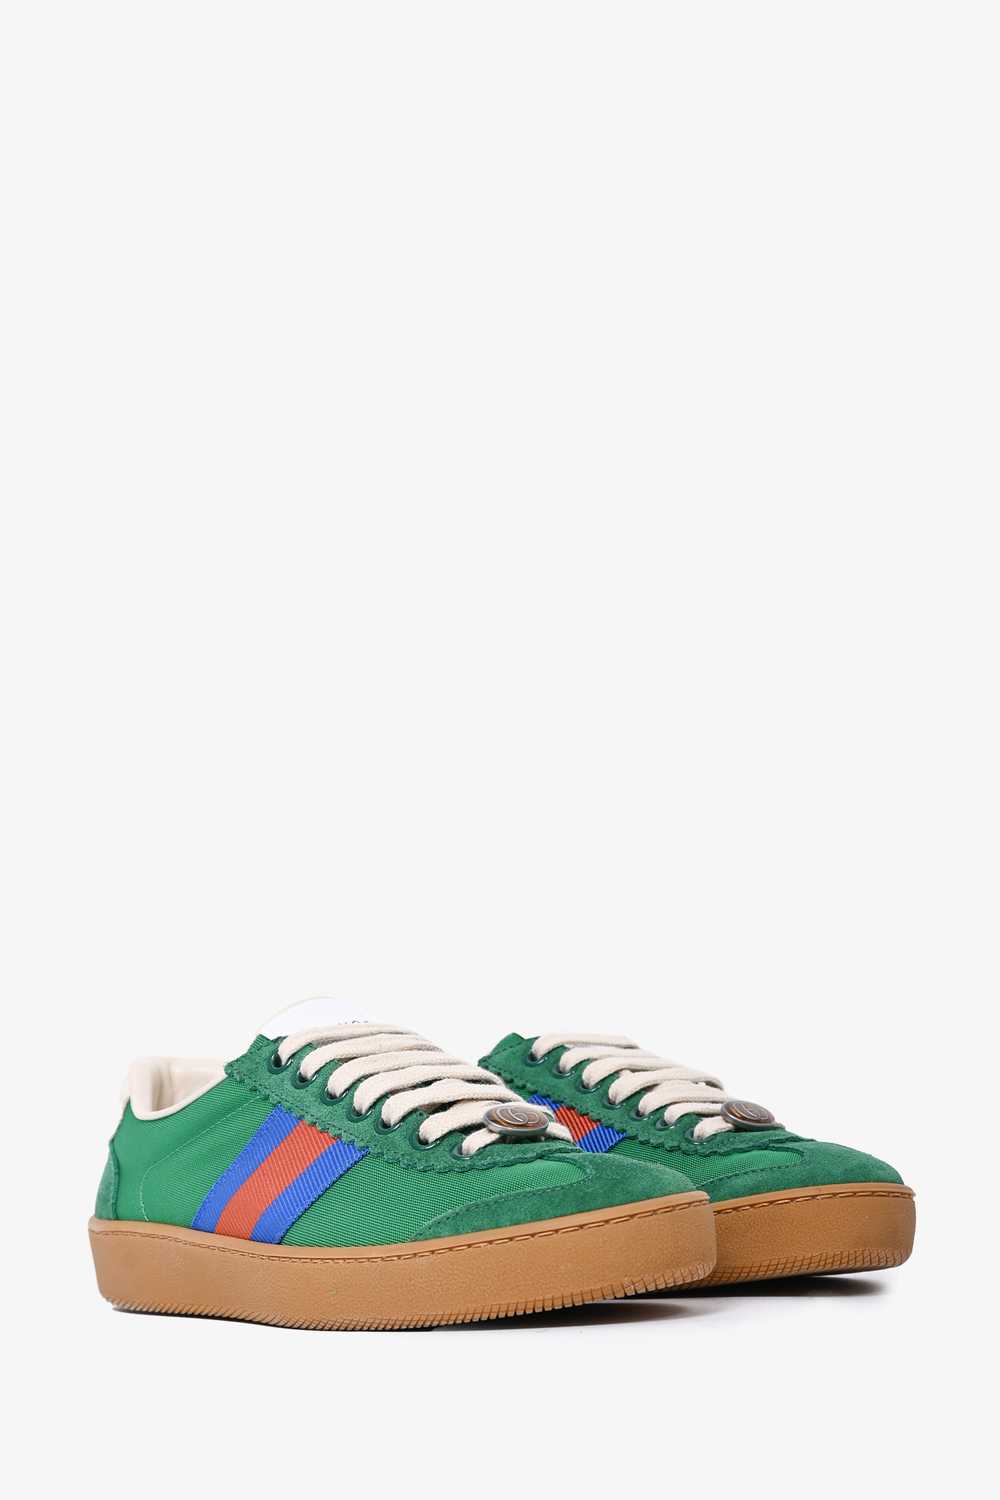 Gucci Green Web Accent Sneakers Size 35 - image 2